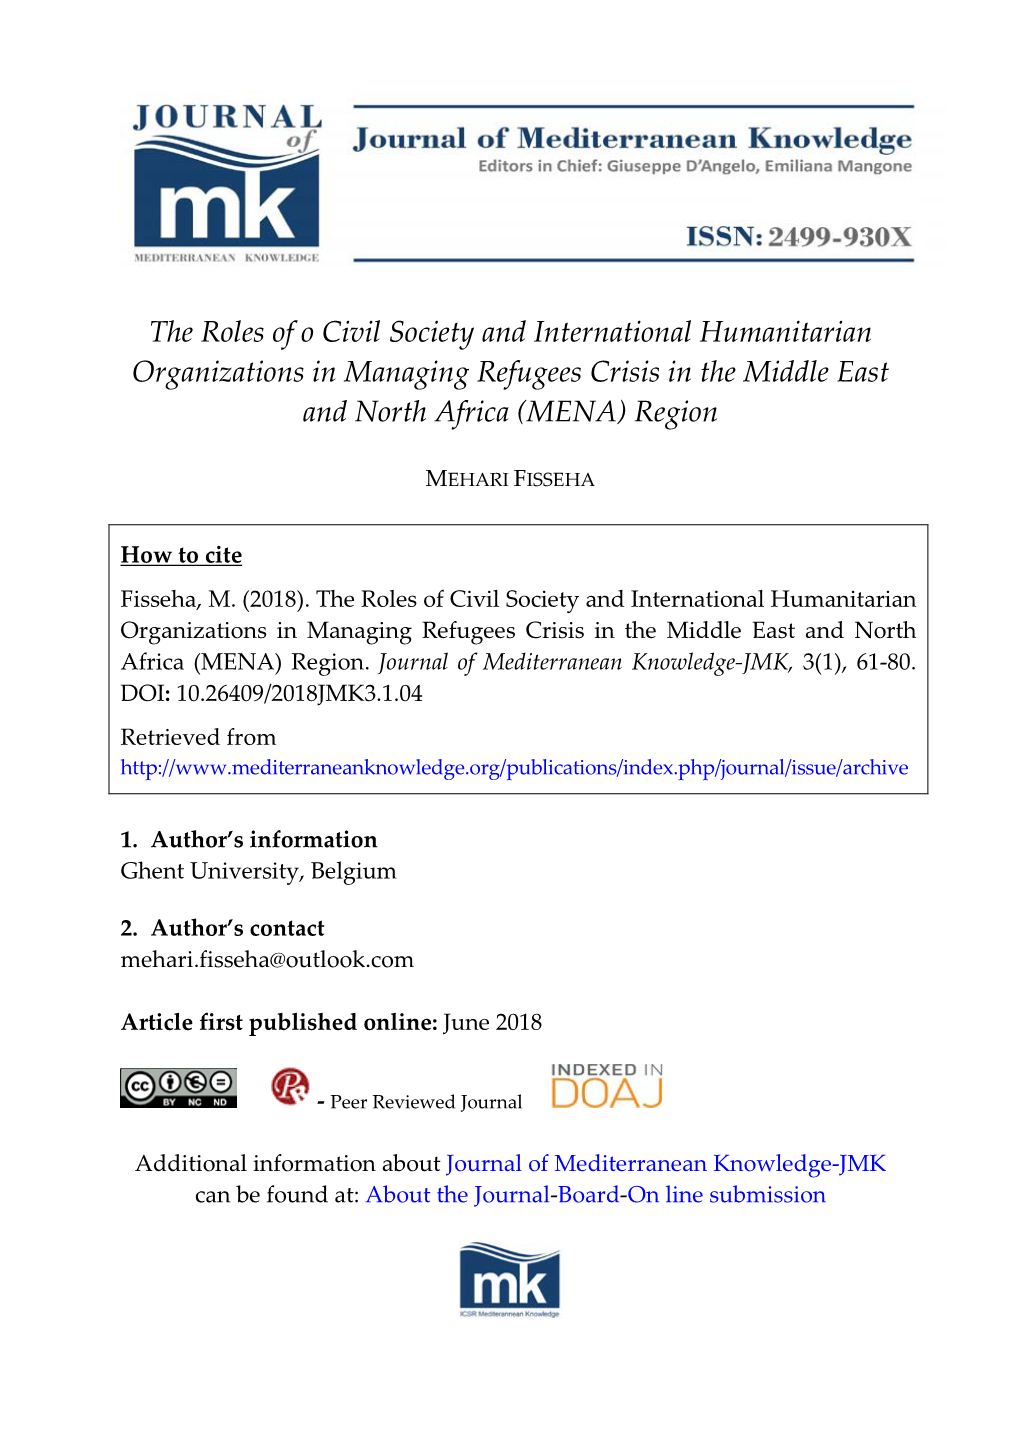 The Roles of O Civil Society and International Humanitarian Organizations in Managing Refugees Crisis in the Middle East and North Africa (MENA) Region